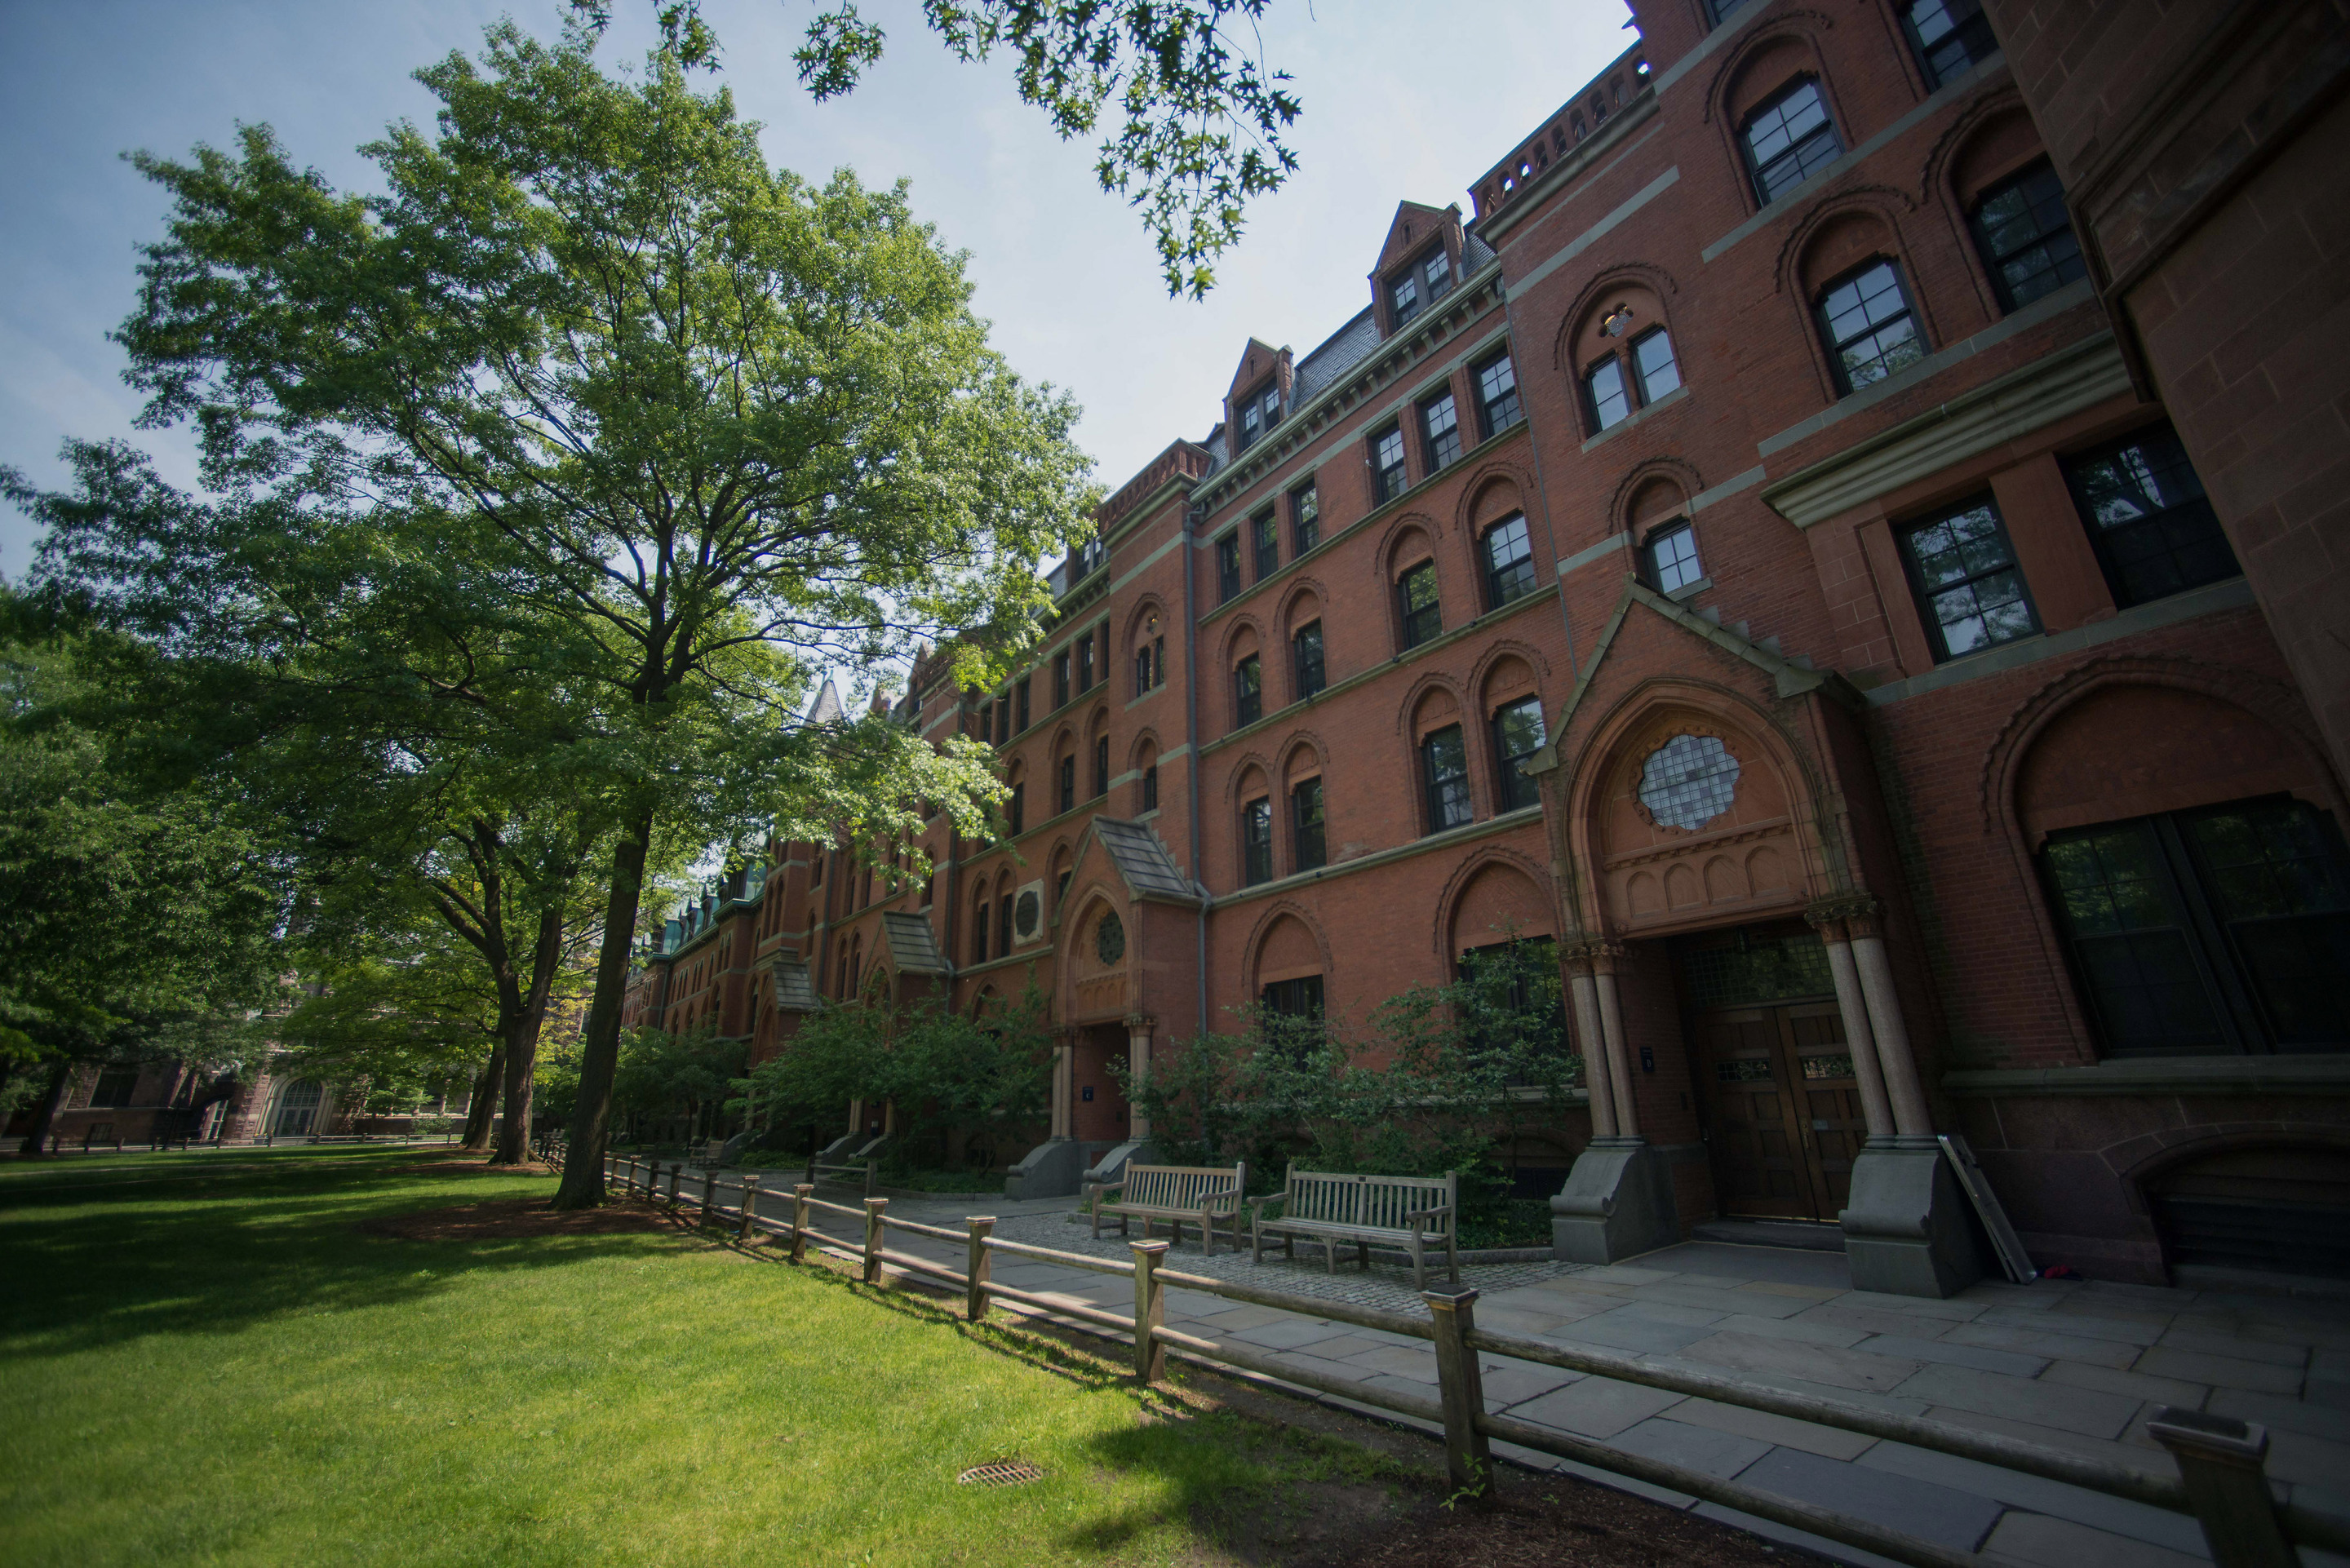 Buildings stand on the Yale University campus in New Haven, Connecticut on  June 12, 2015. (Craig Warga—Bloomberg/Getty Images)